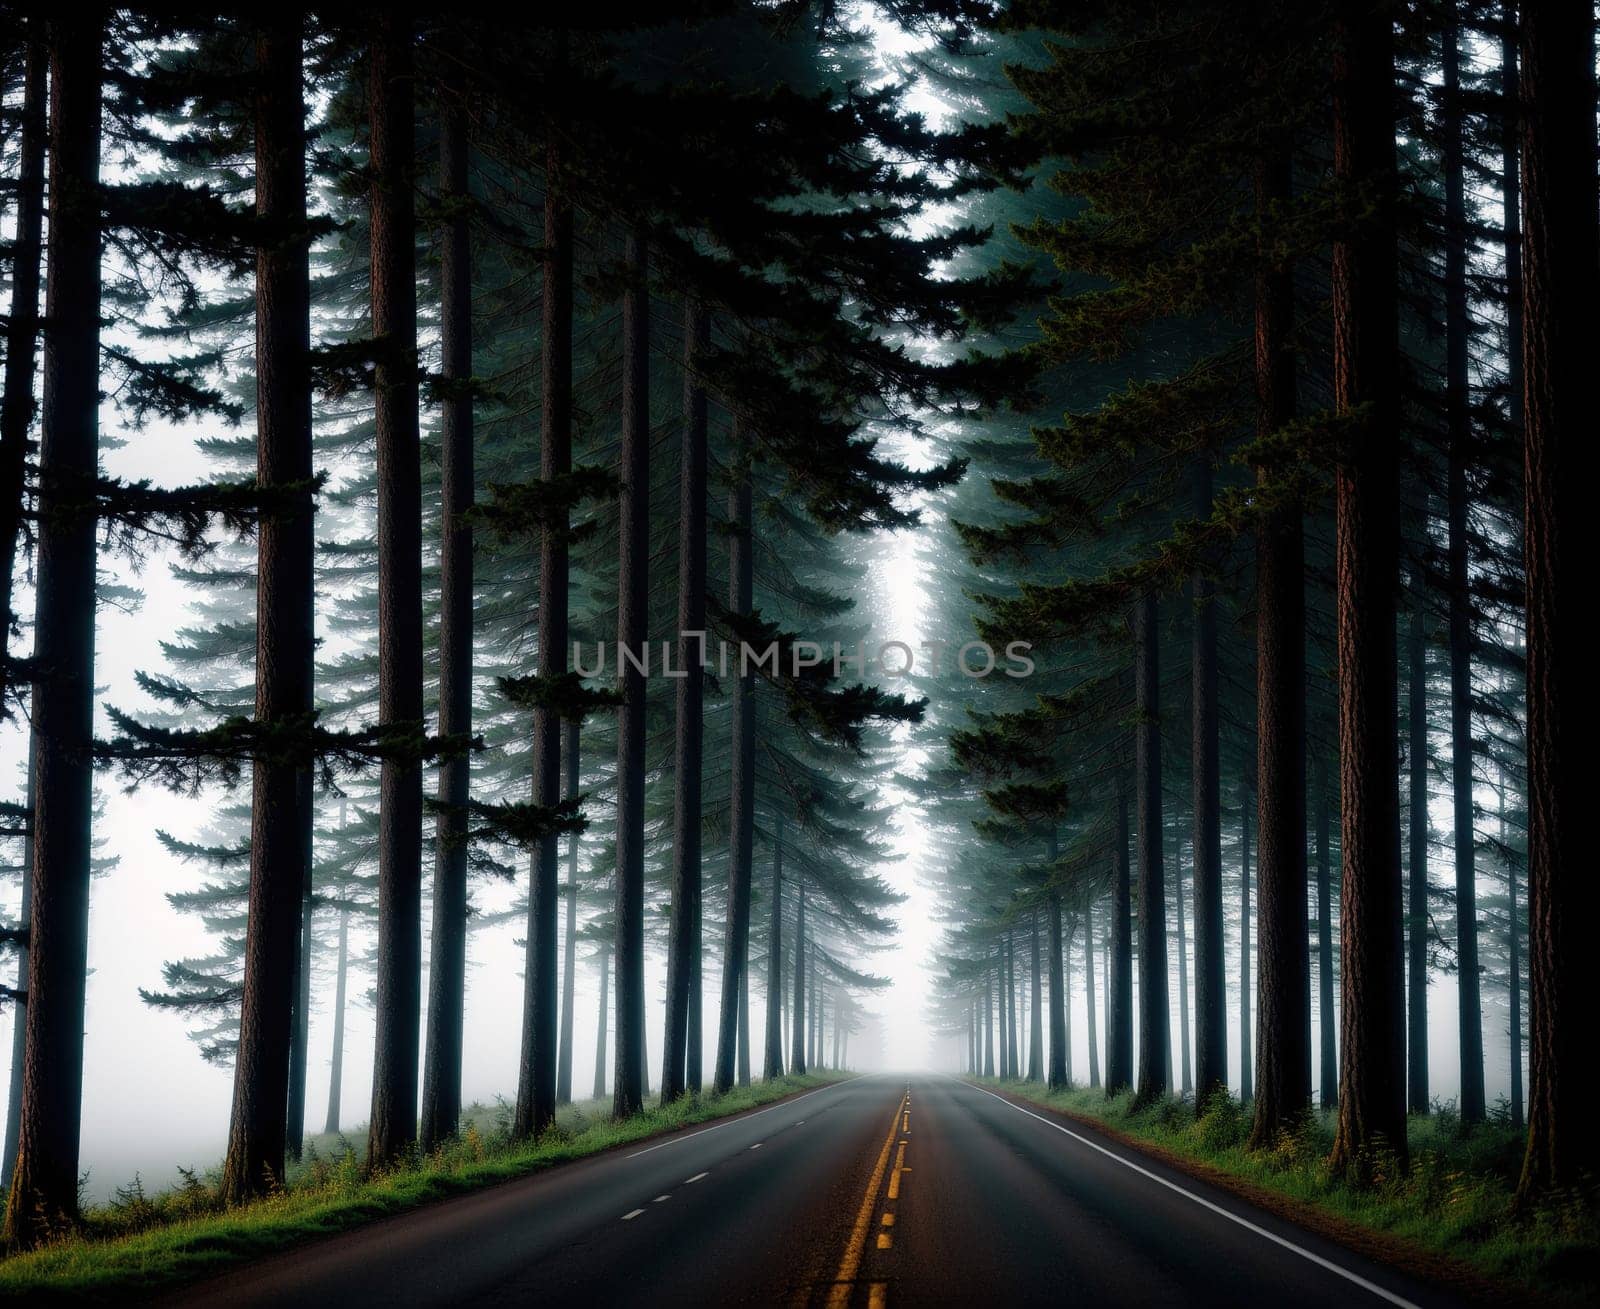 The image shows a road lined with tall, thin trees on either side, creating a foggy and eerie atmosphere.